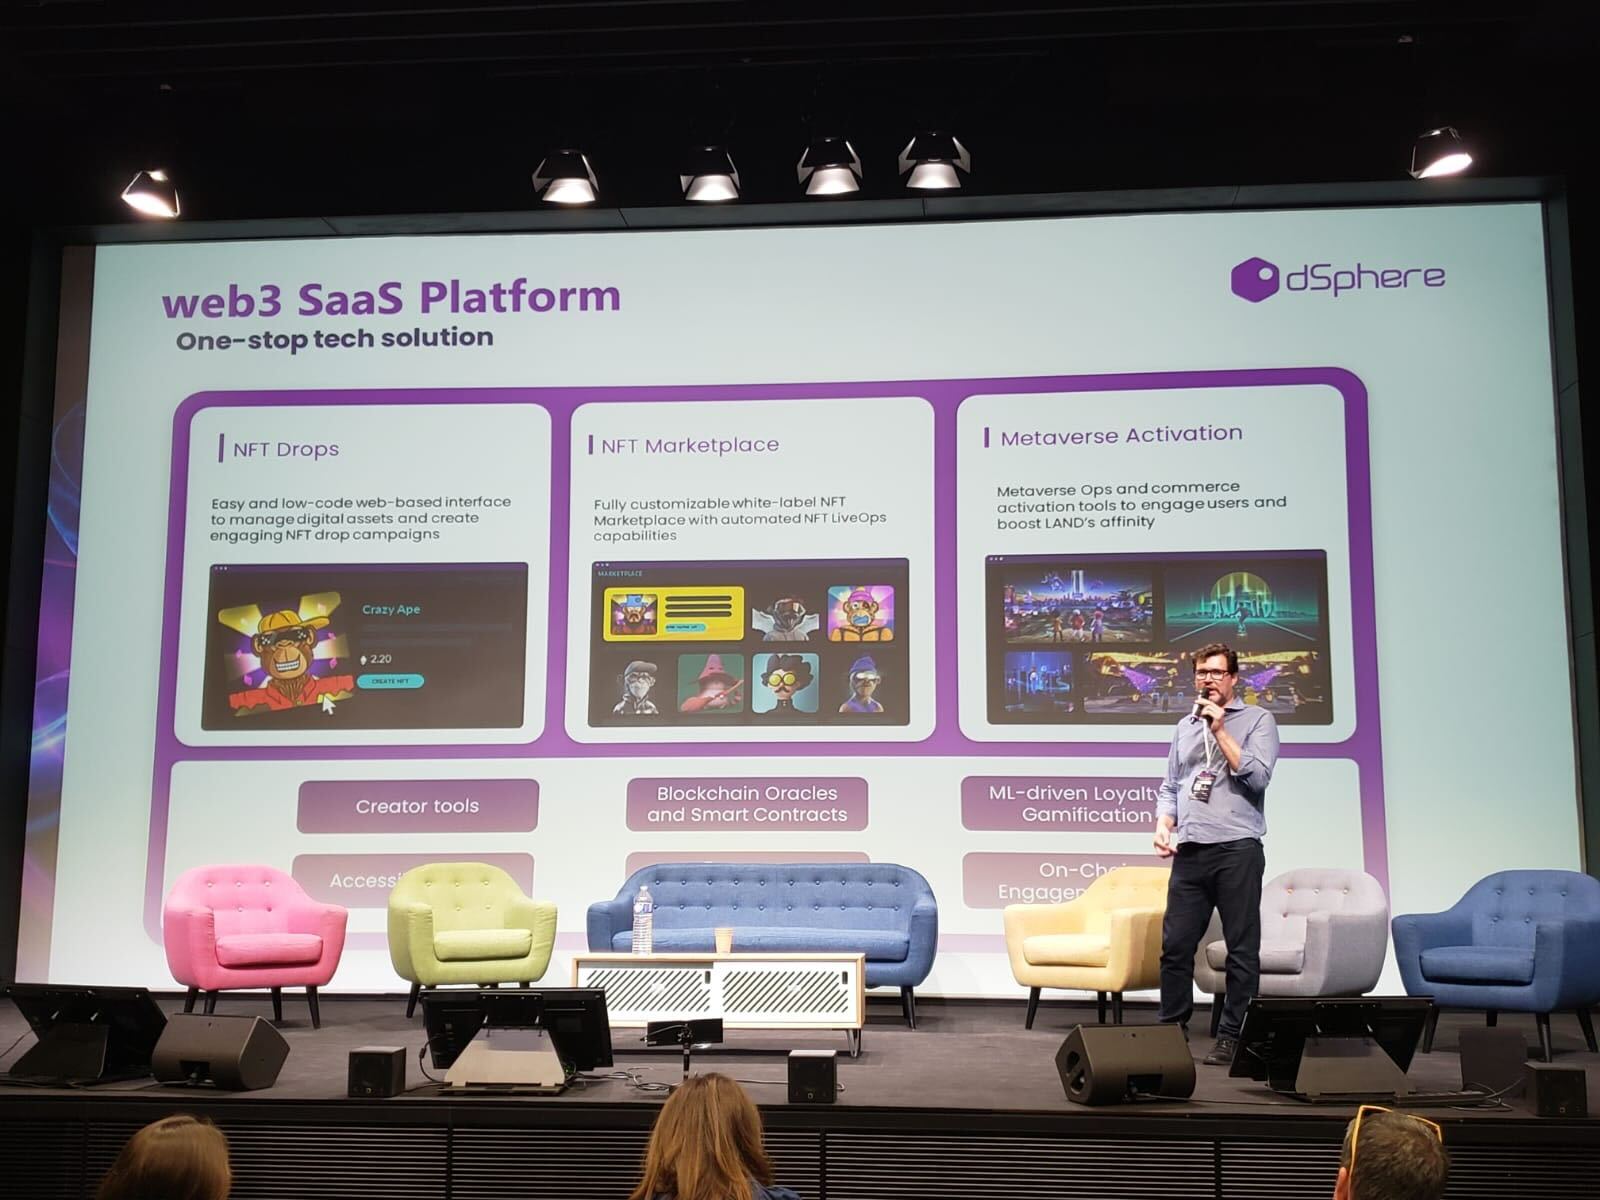 Carlos Estigarribia of dSphere delivering a talk on “Empowering brands and game publishers in the Metaverse” at Metaverse Summit in Paris